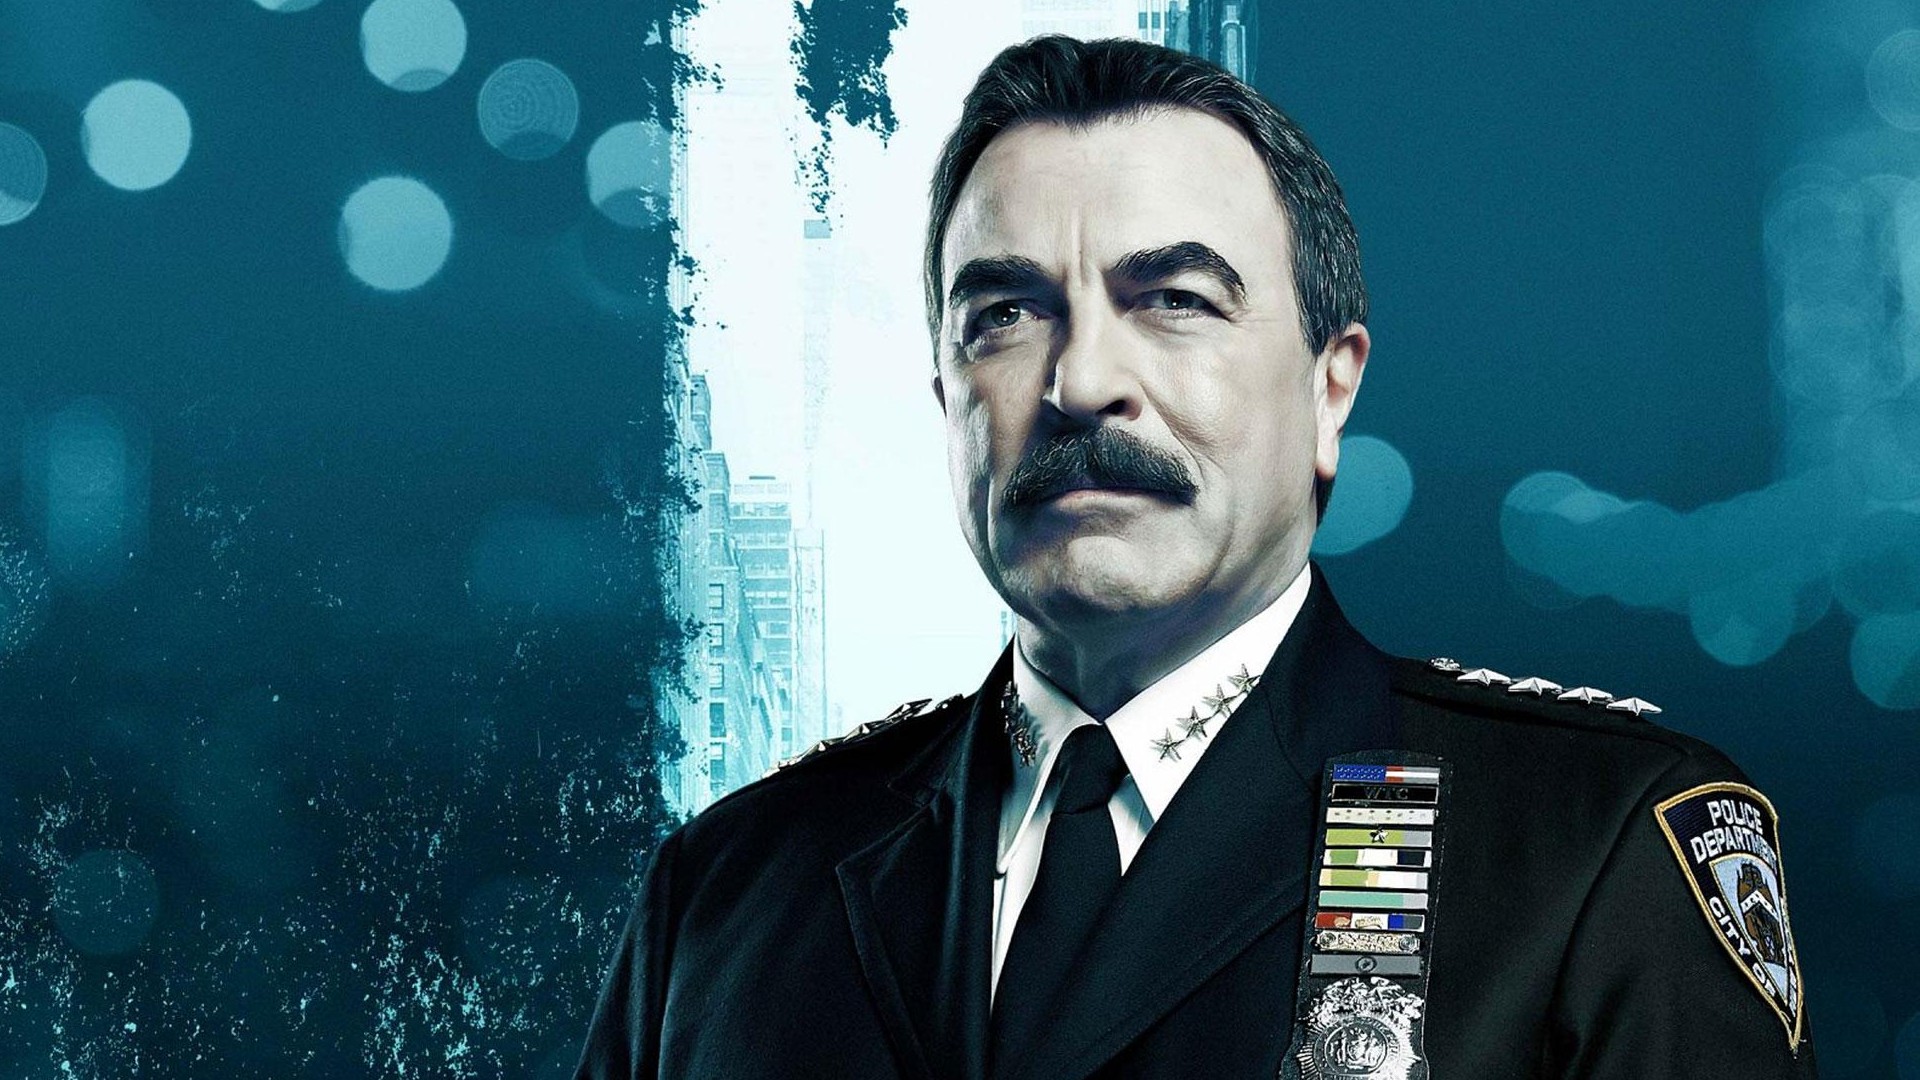 Behind-the-Scenes Tom Selleck Drama That Made Blue Bloods Showrunner Leave